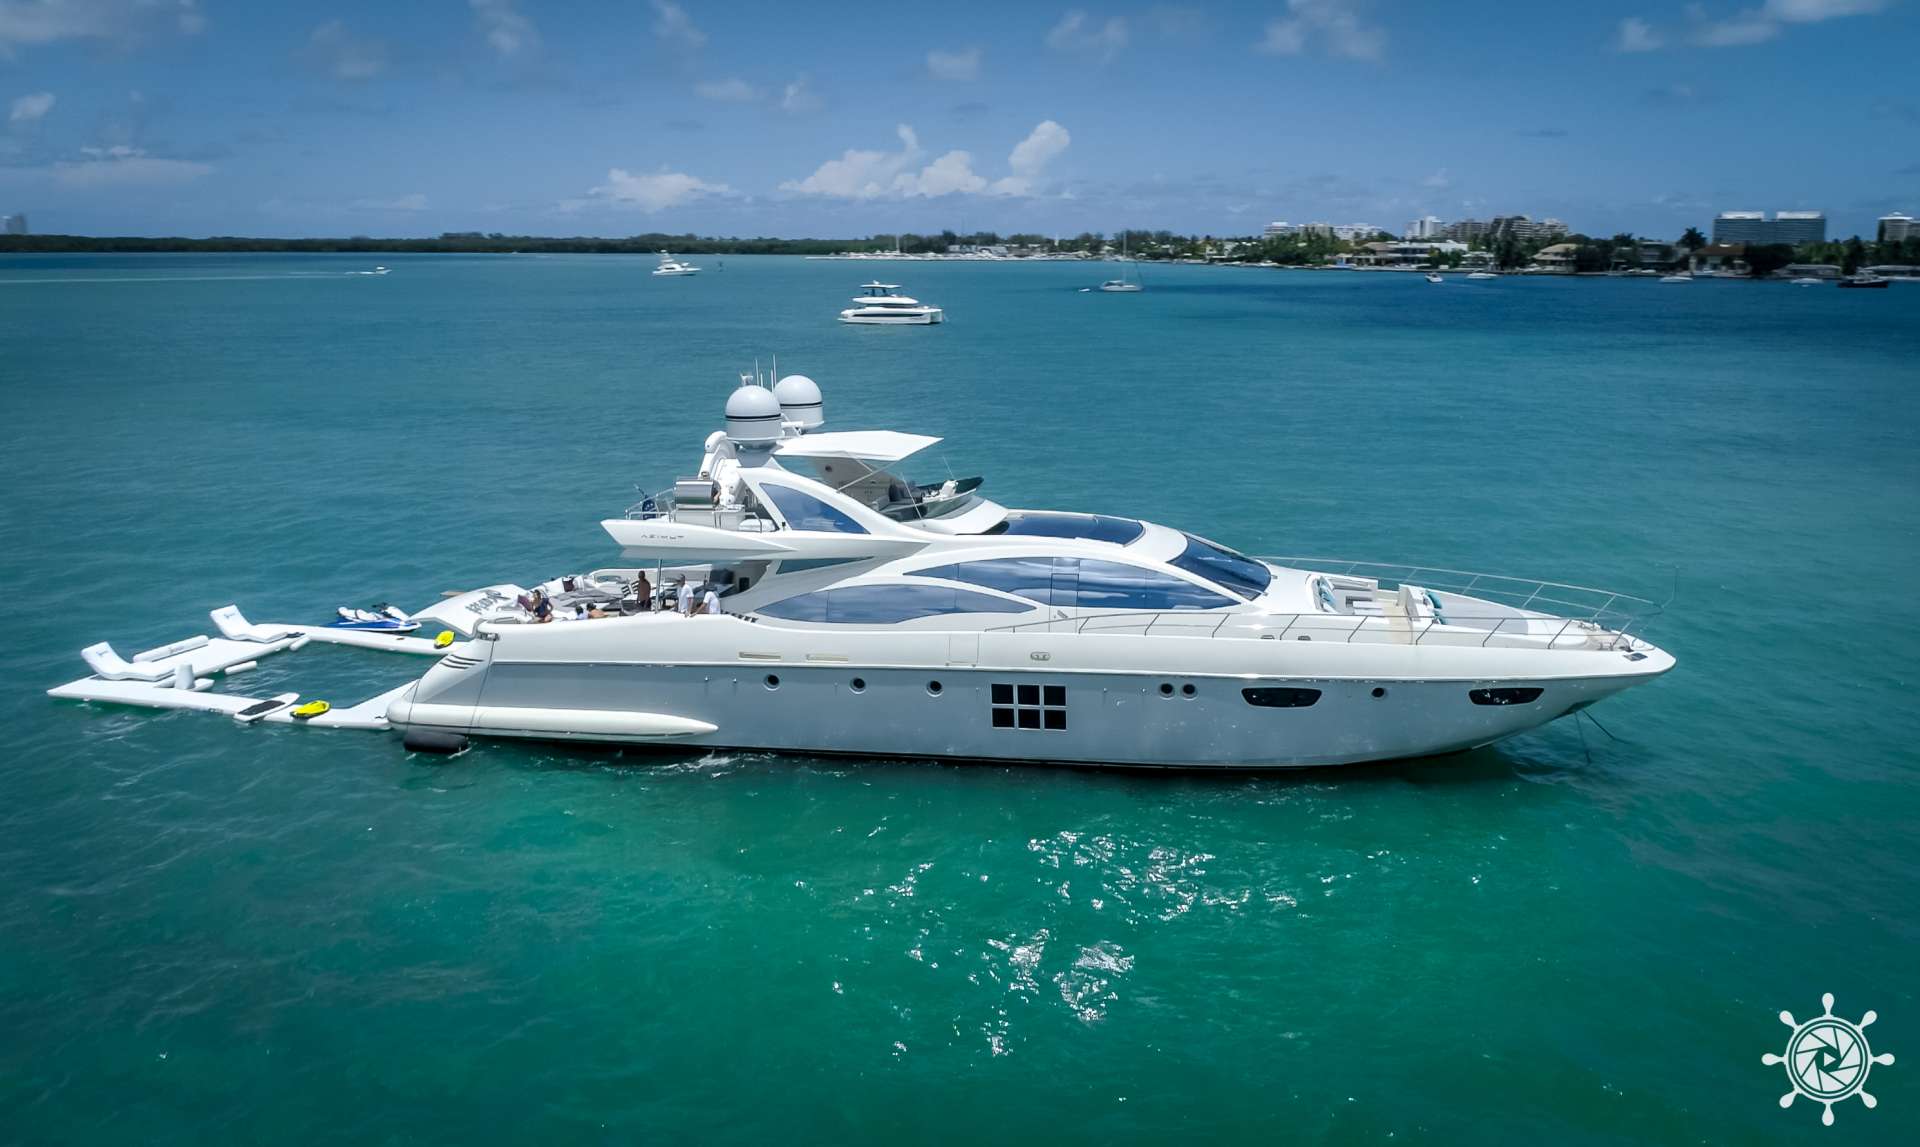 Scarlet - Yacht Charter Annapolis & Boat hire in US East Coast, Bahamas & Mexico 1